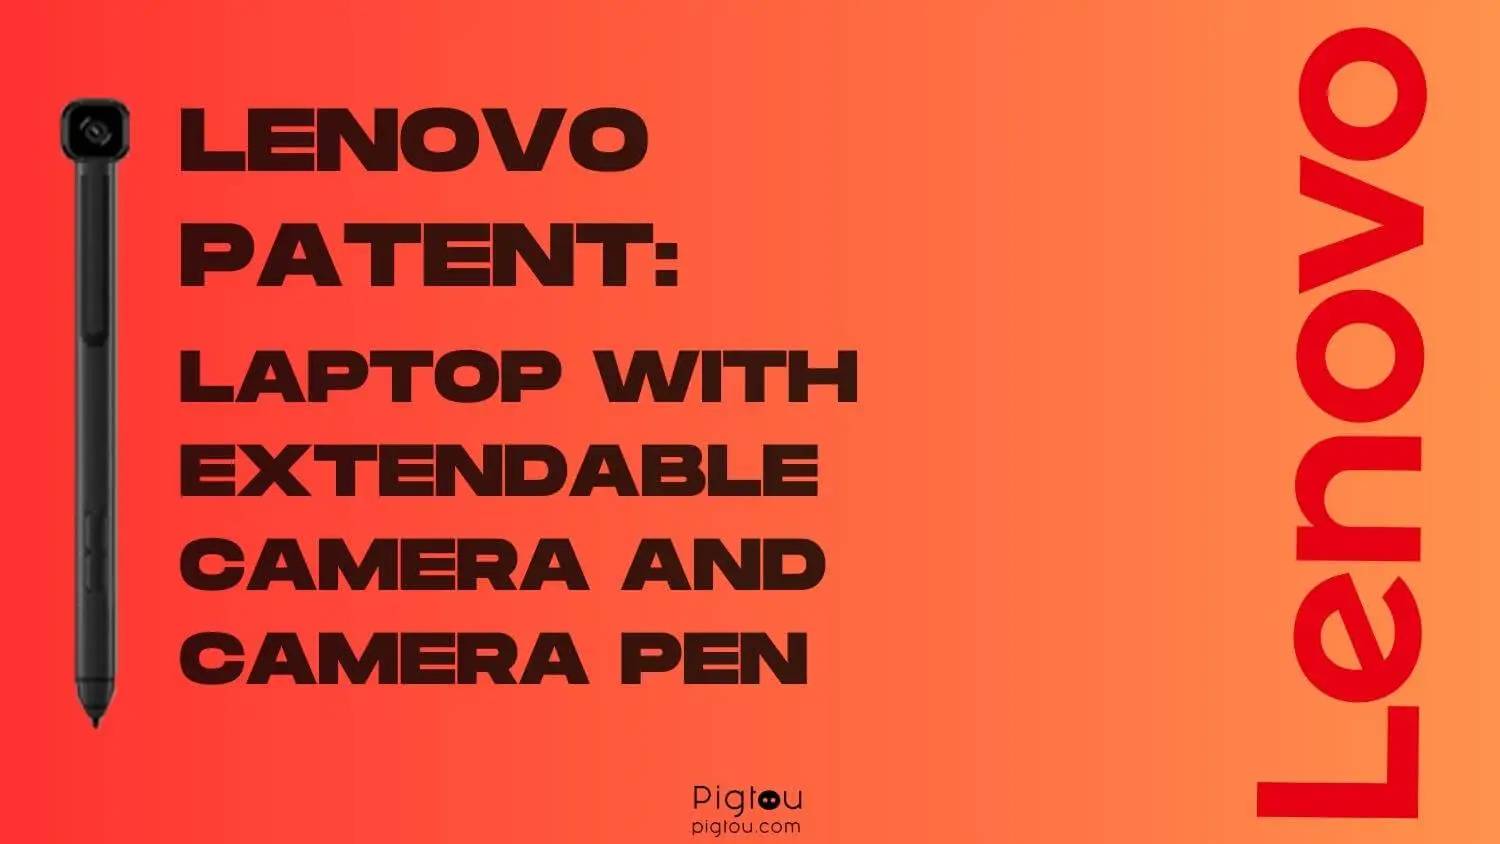 Lenovo-Patent-Laptop-with-Extendable-Camera-or-Camera-Pen